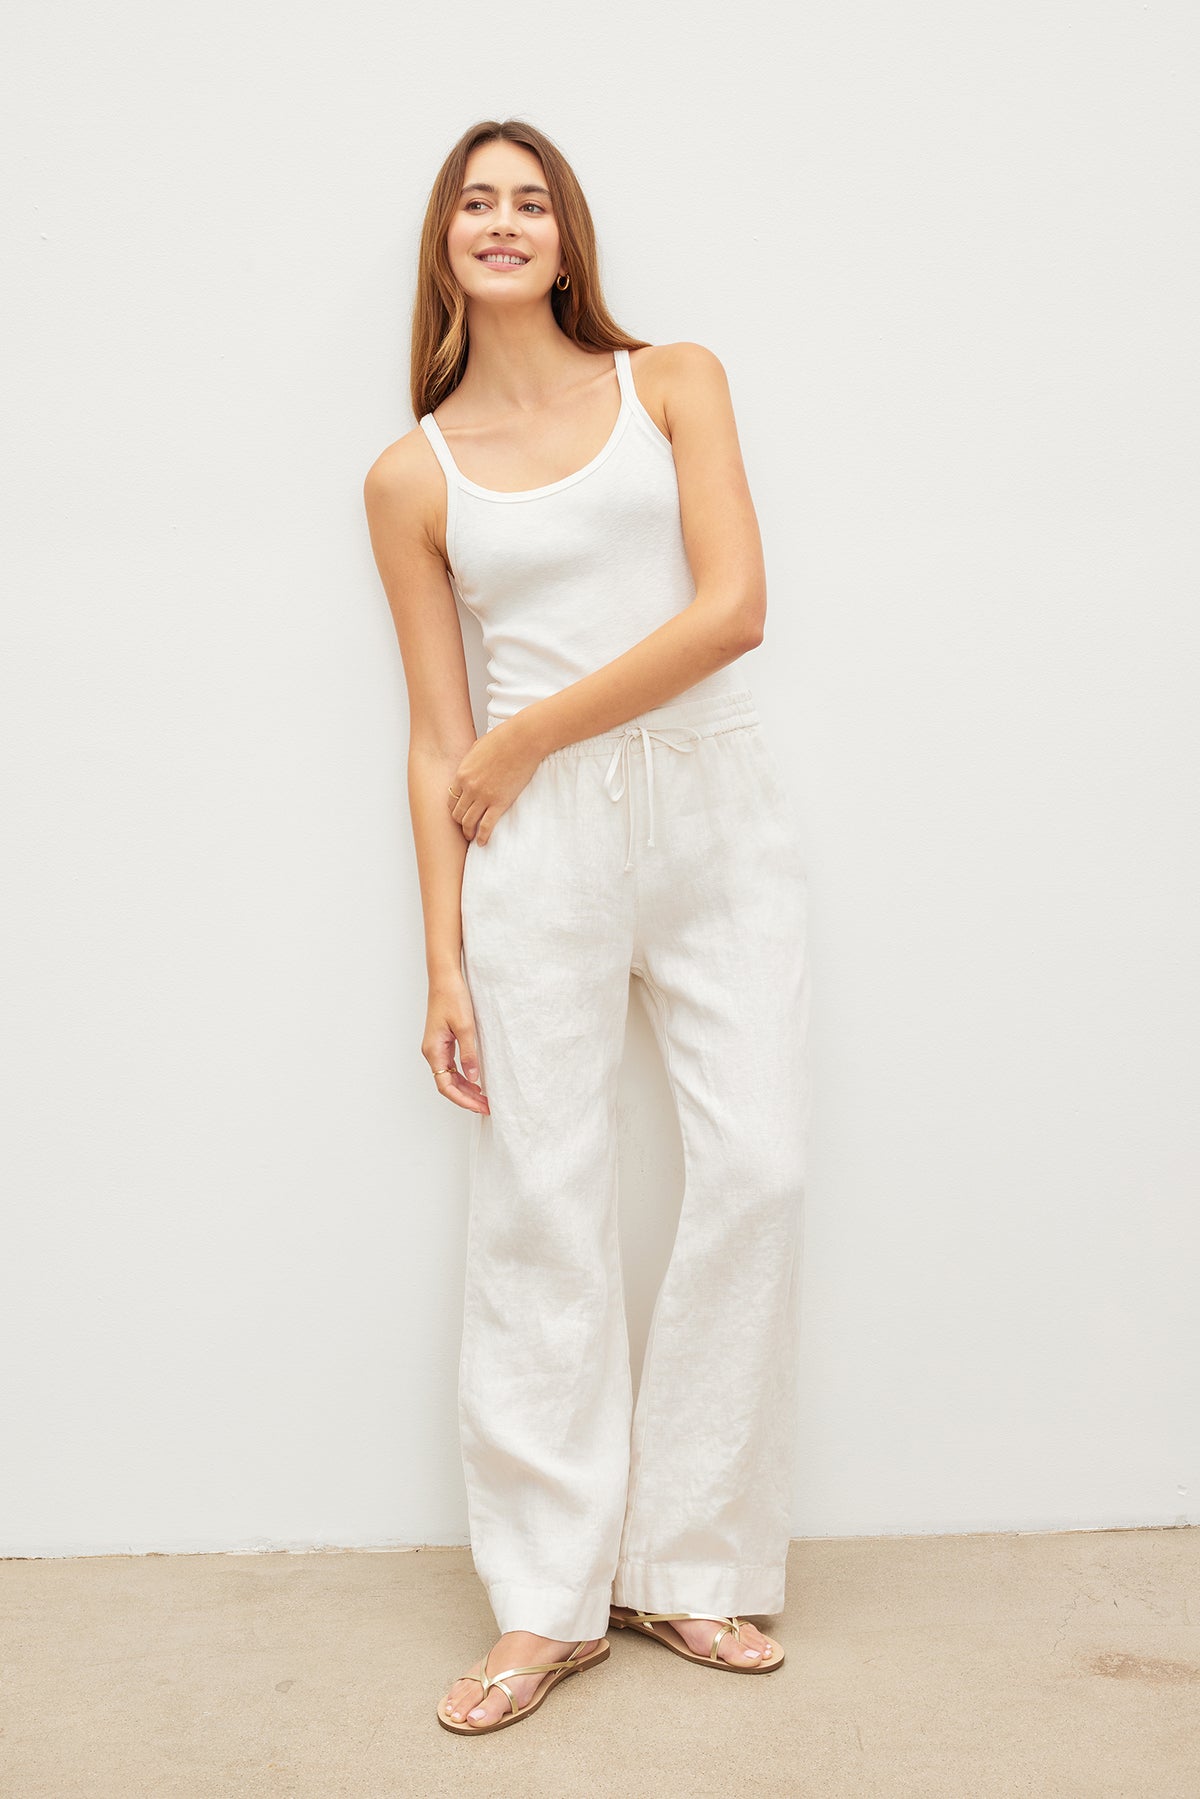 A woman wearing Velvet by Graham & Spencer's GWYNETH HEAVY LINEN PANT and a relaxed drape white tank top.-36026021970113